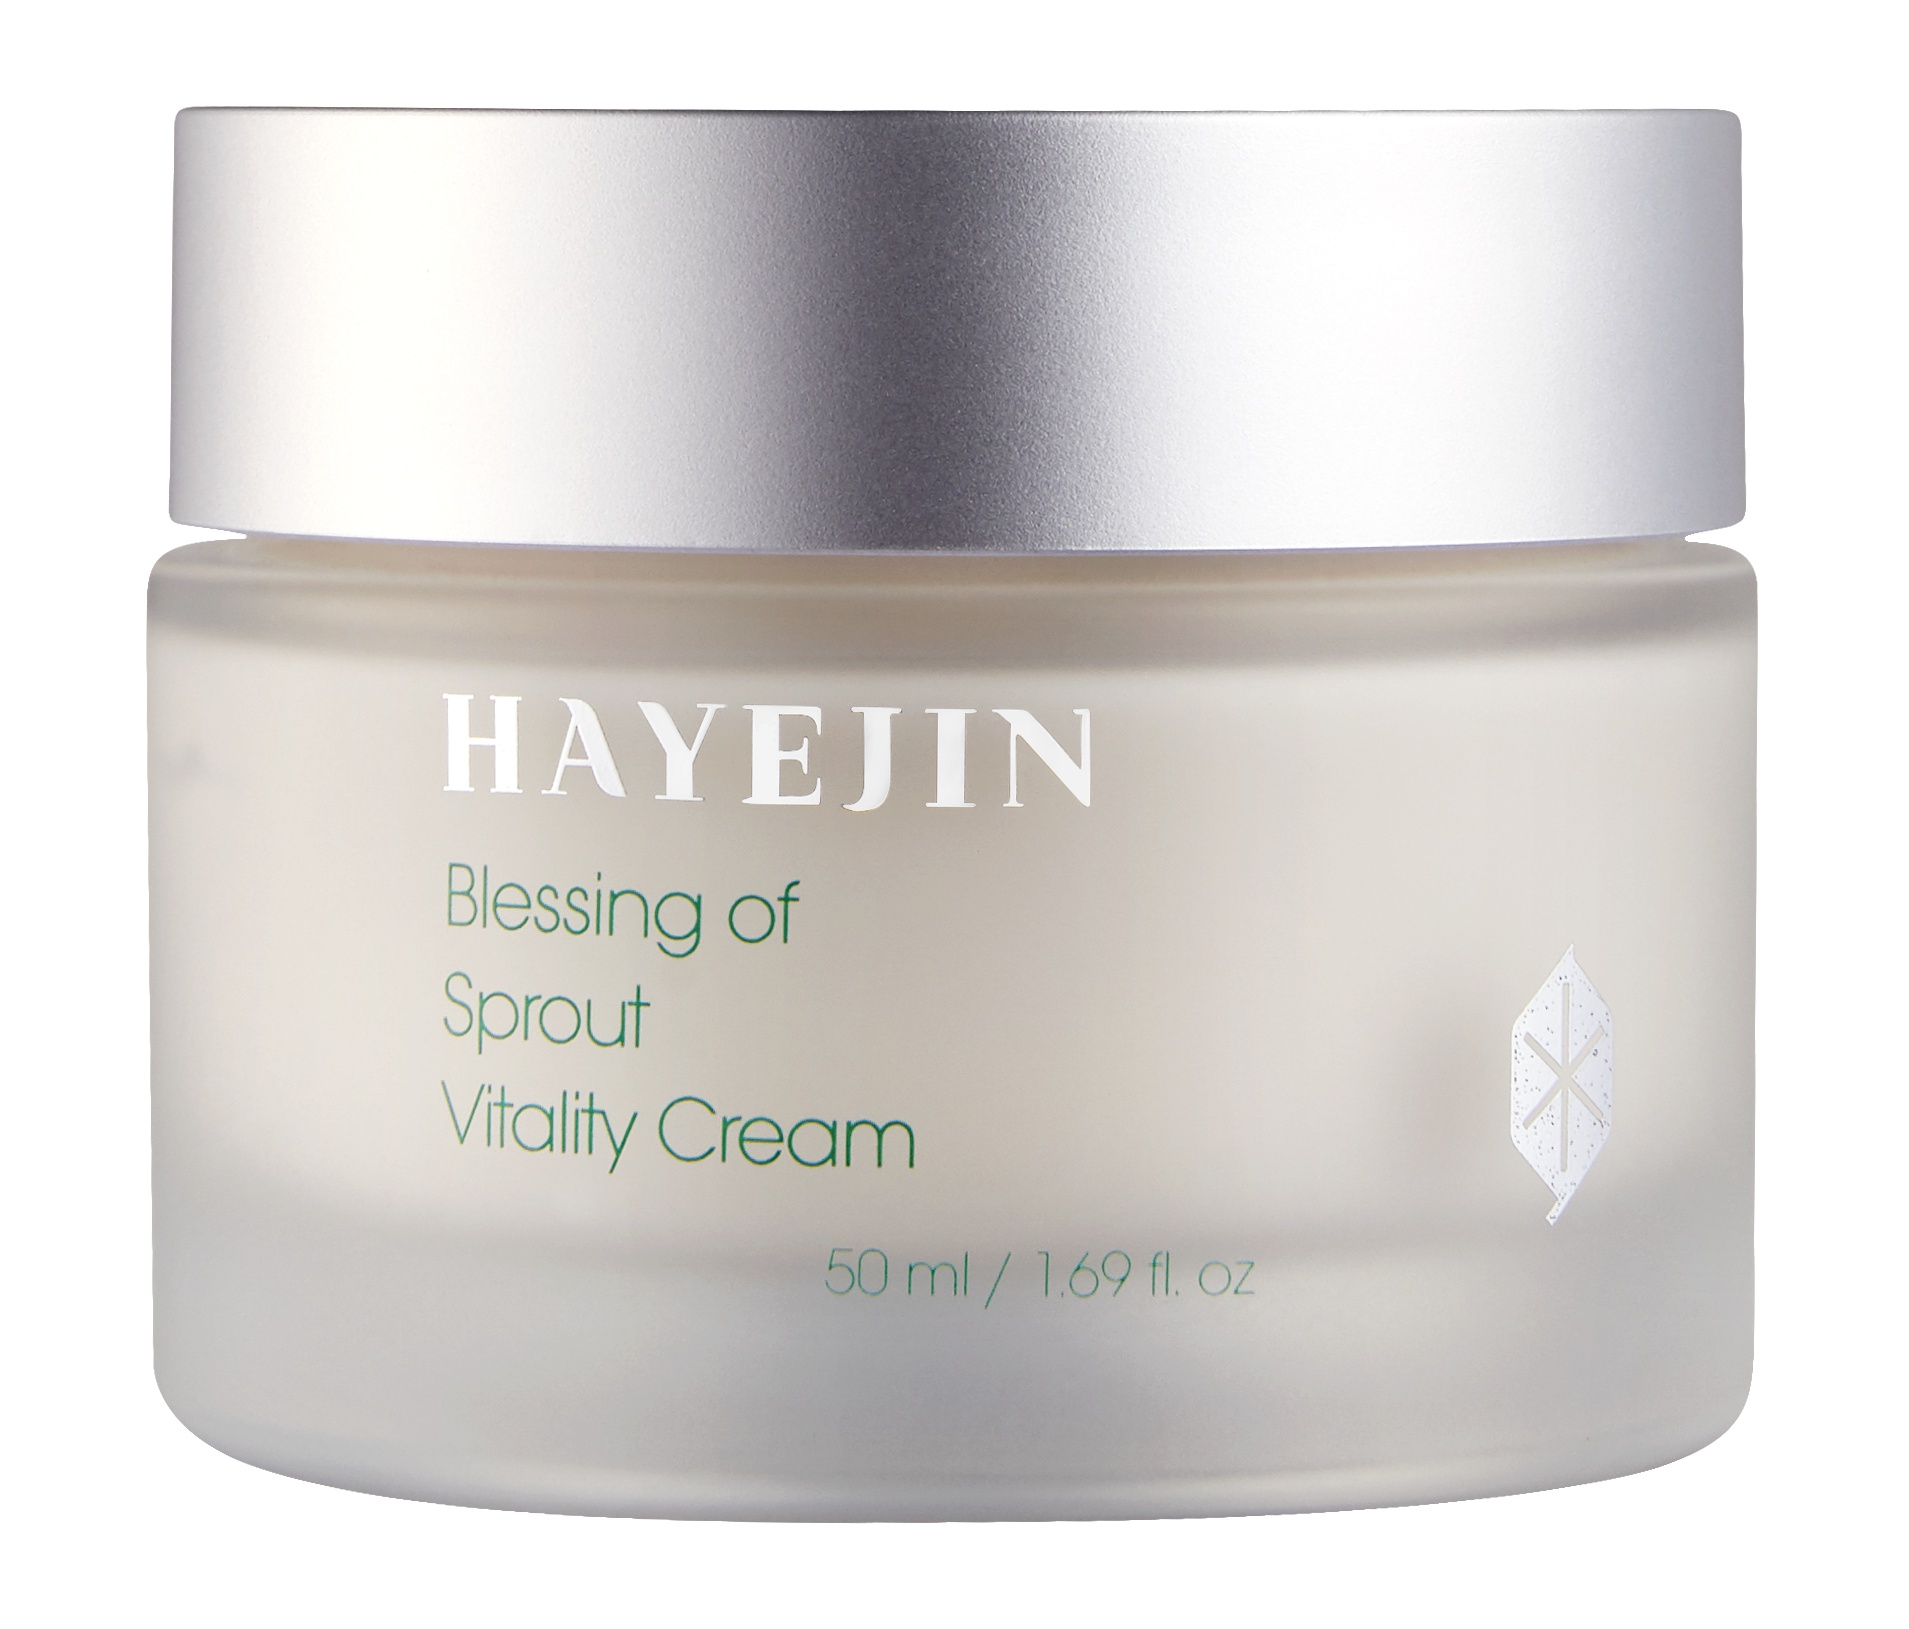 Hayejin Blessing Of Sprout Vitality Cream